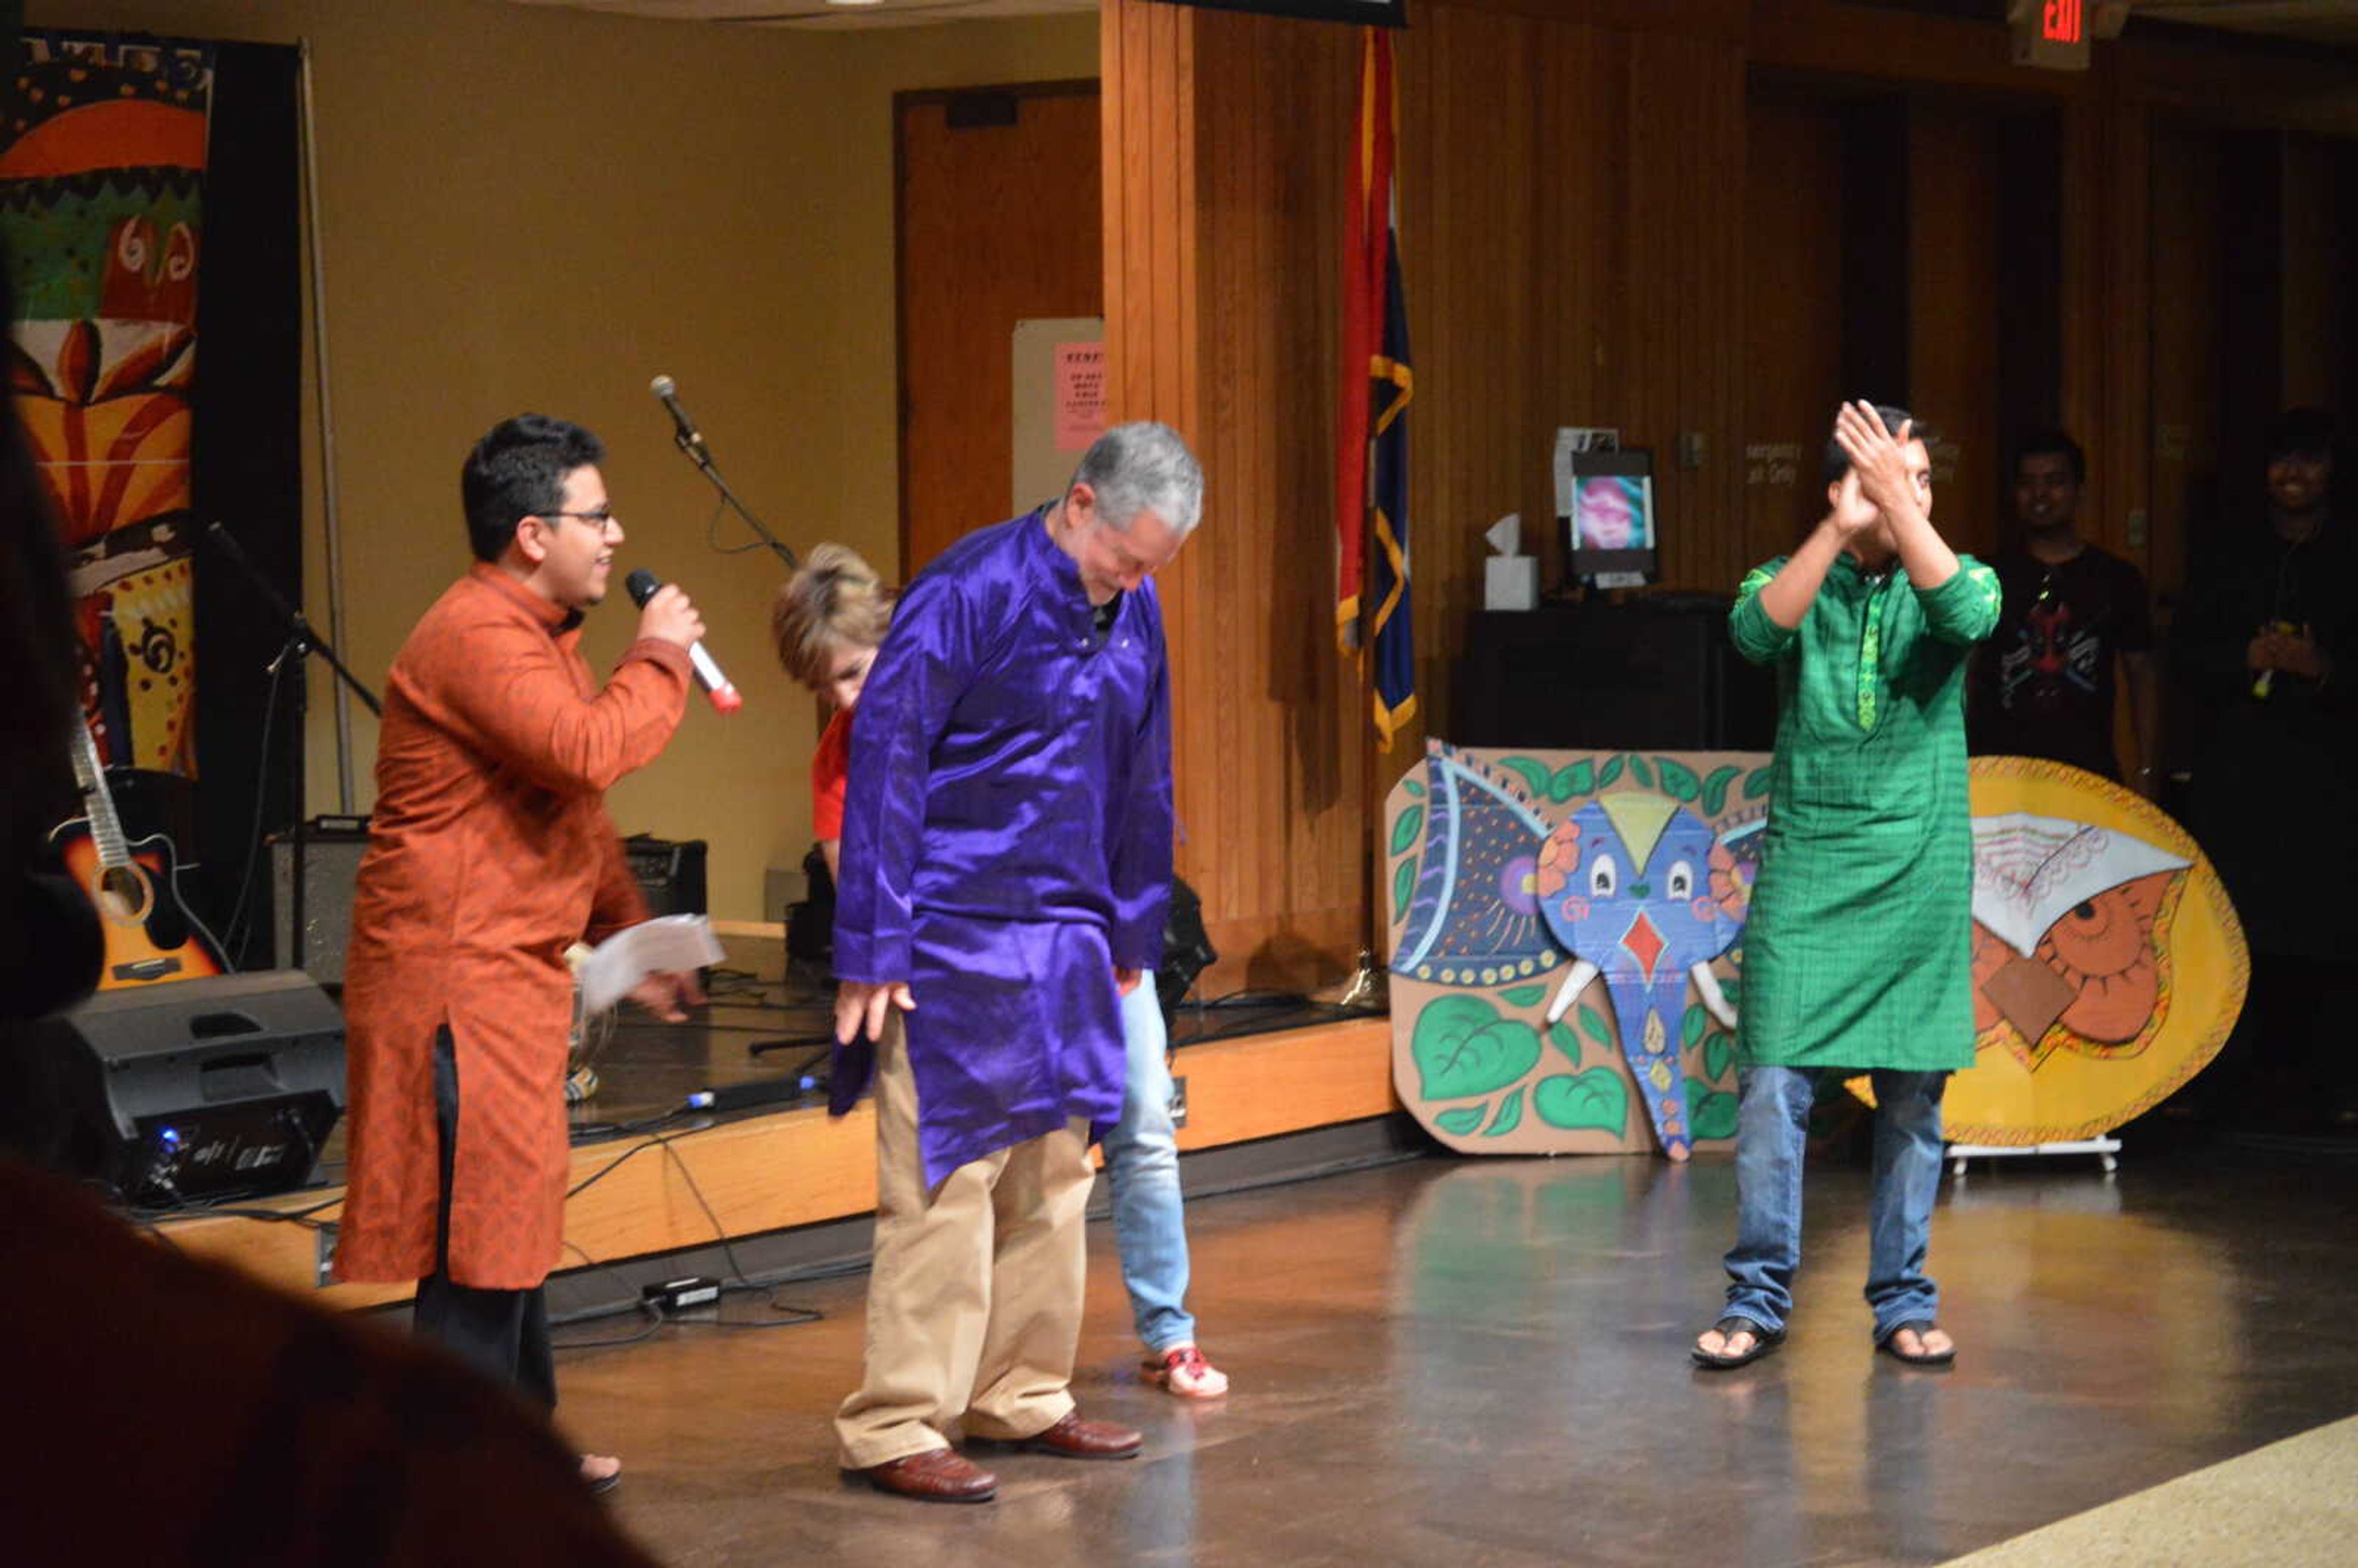 Dr. Vargas puts on the panjabi with the help of his wife.